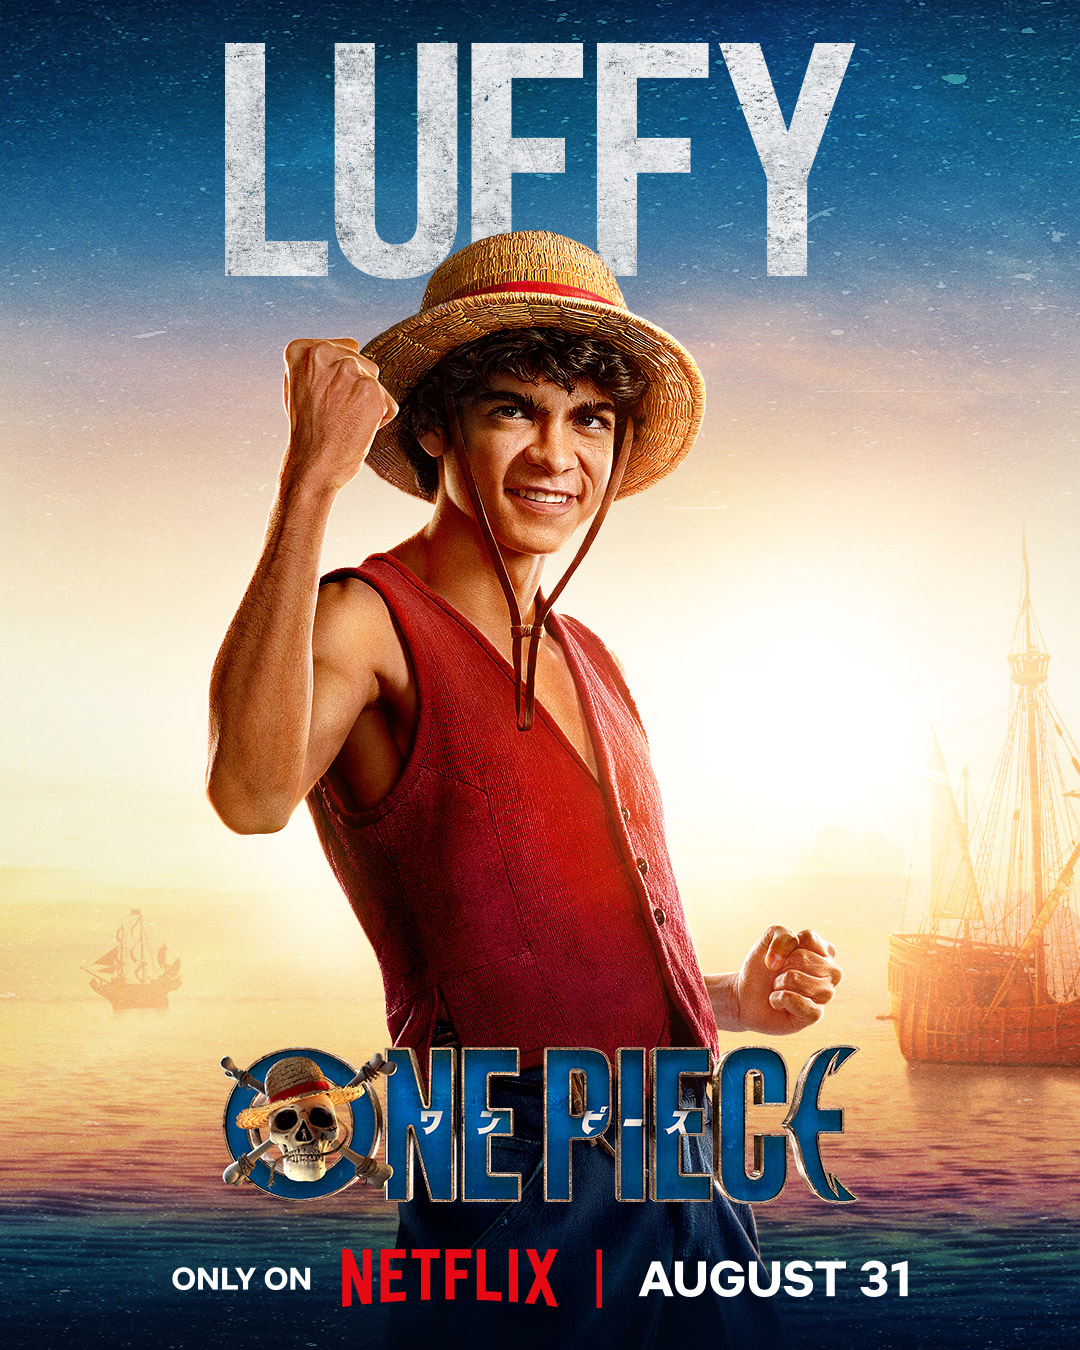 One Piece Cast - One Piece Live-Action Cast and Character Details